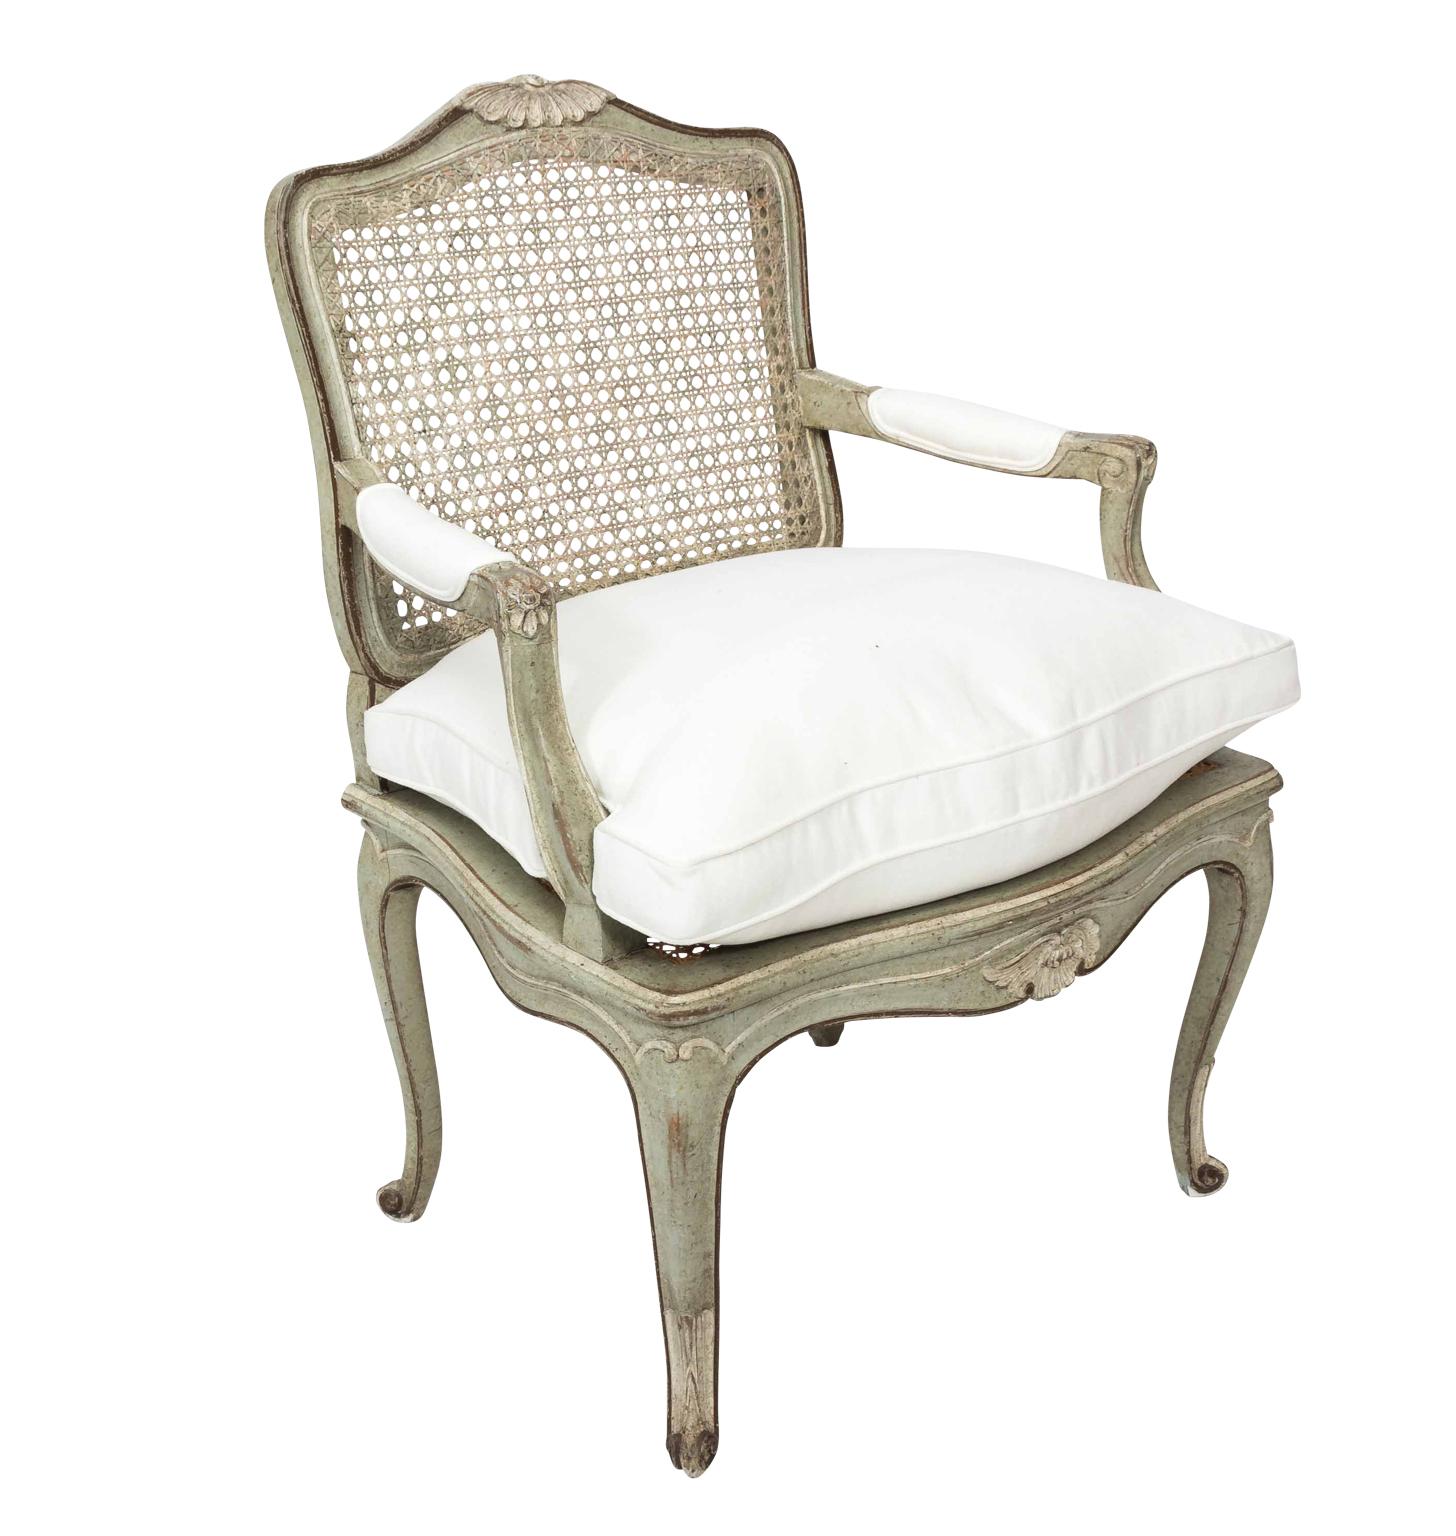 Lovely Louis XVI Cane Back Painted Fauteuil